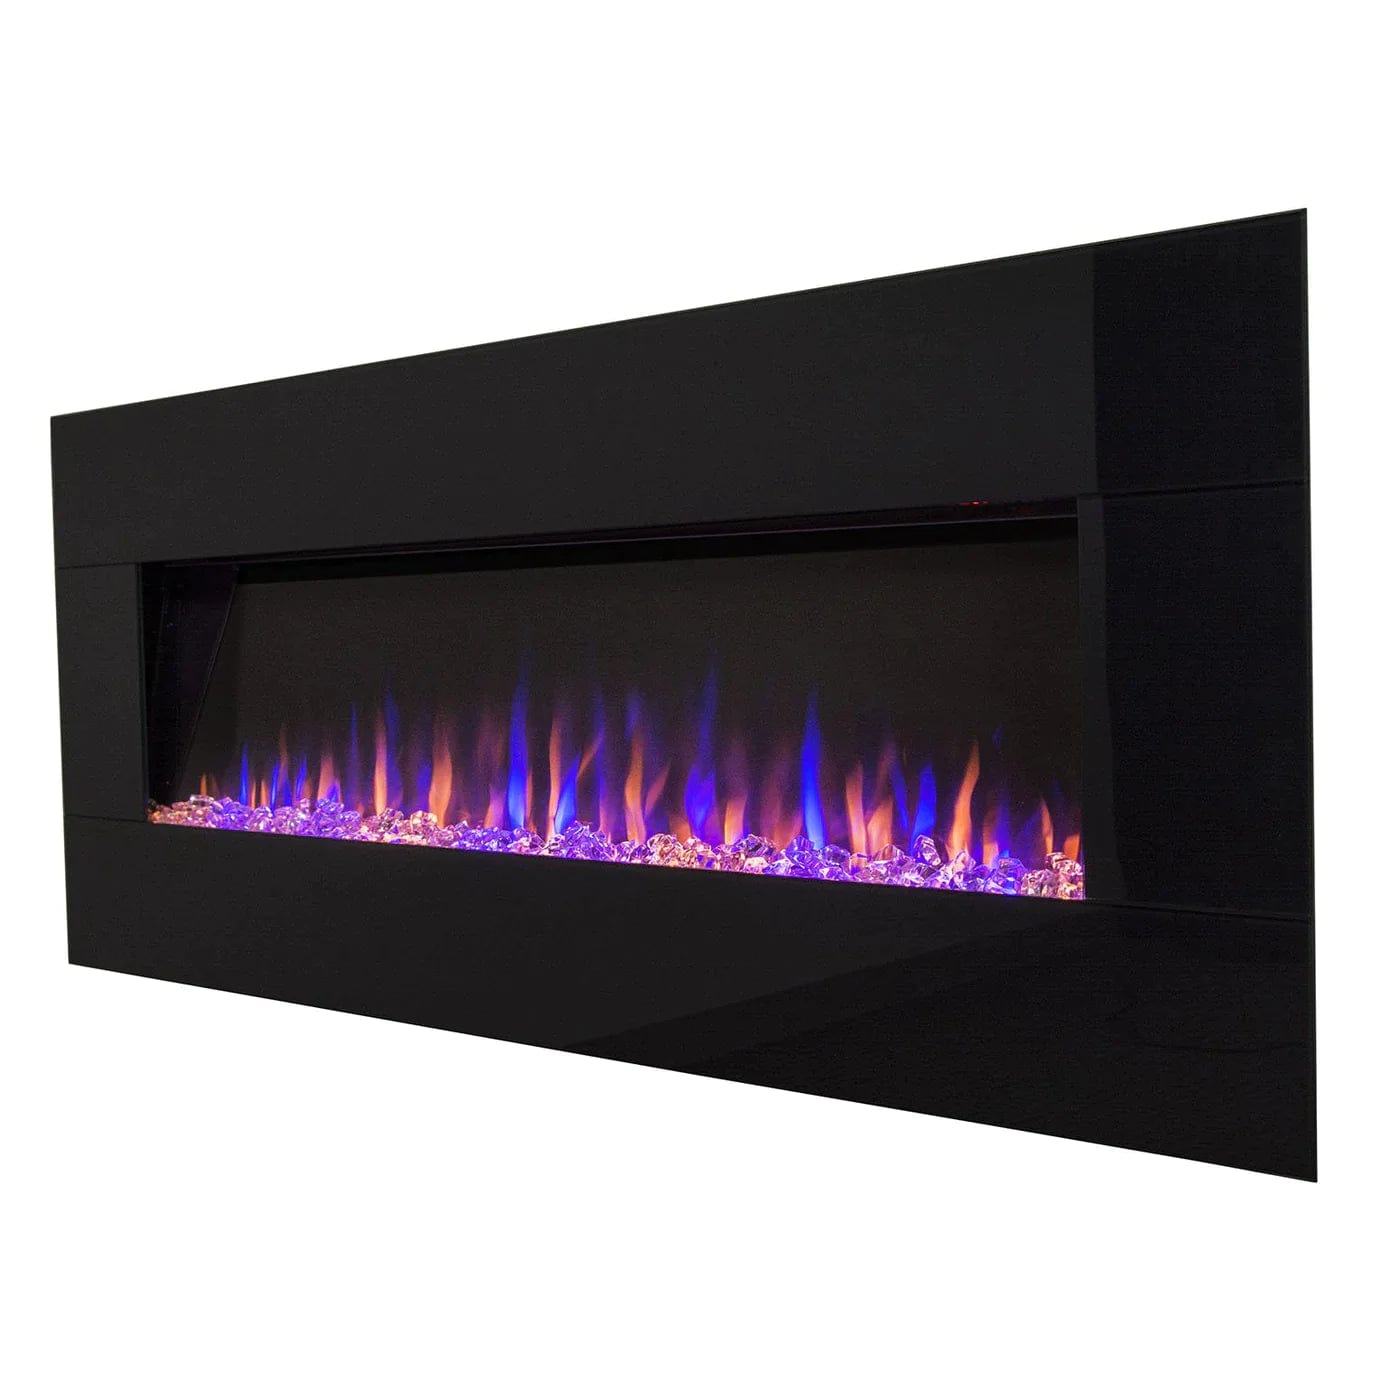 Touchstone 80035 AudioFlare Black Glass 50-Inch Recessed Electric Fireplace